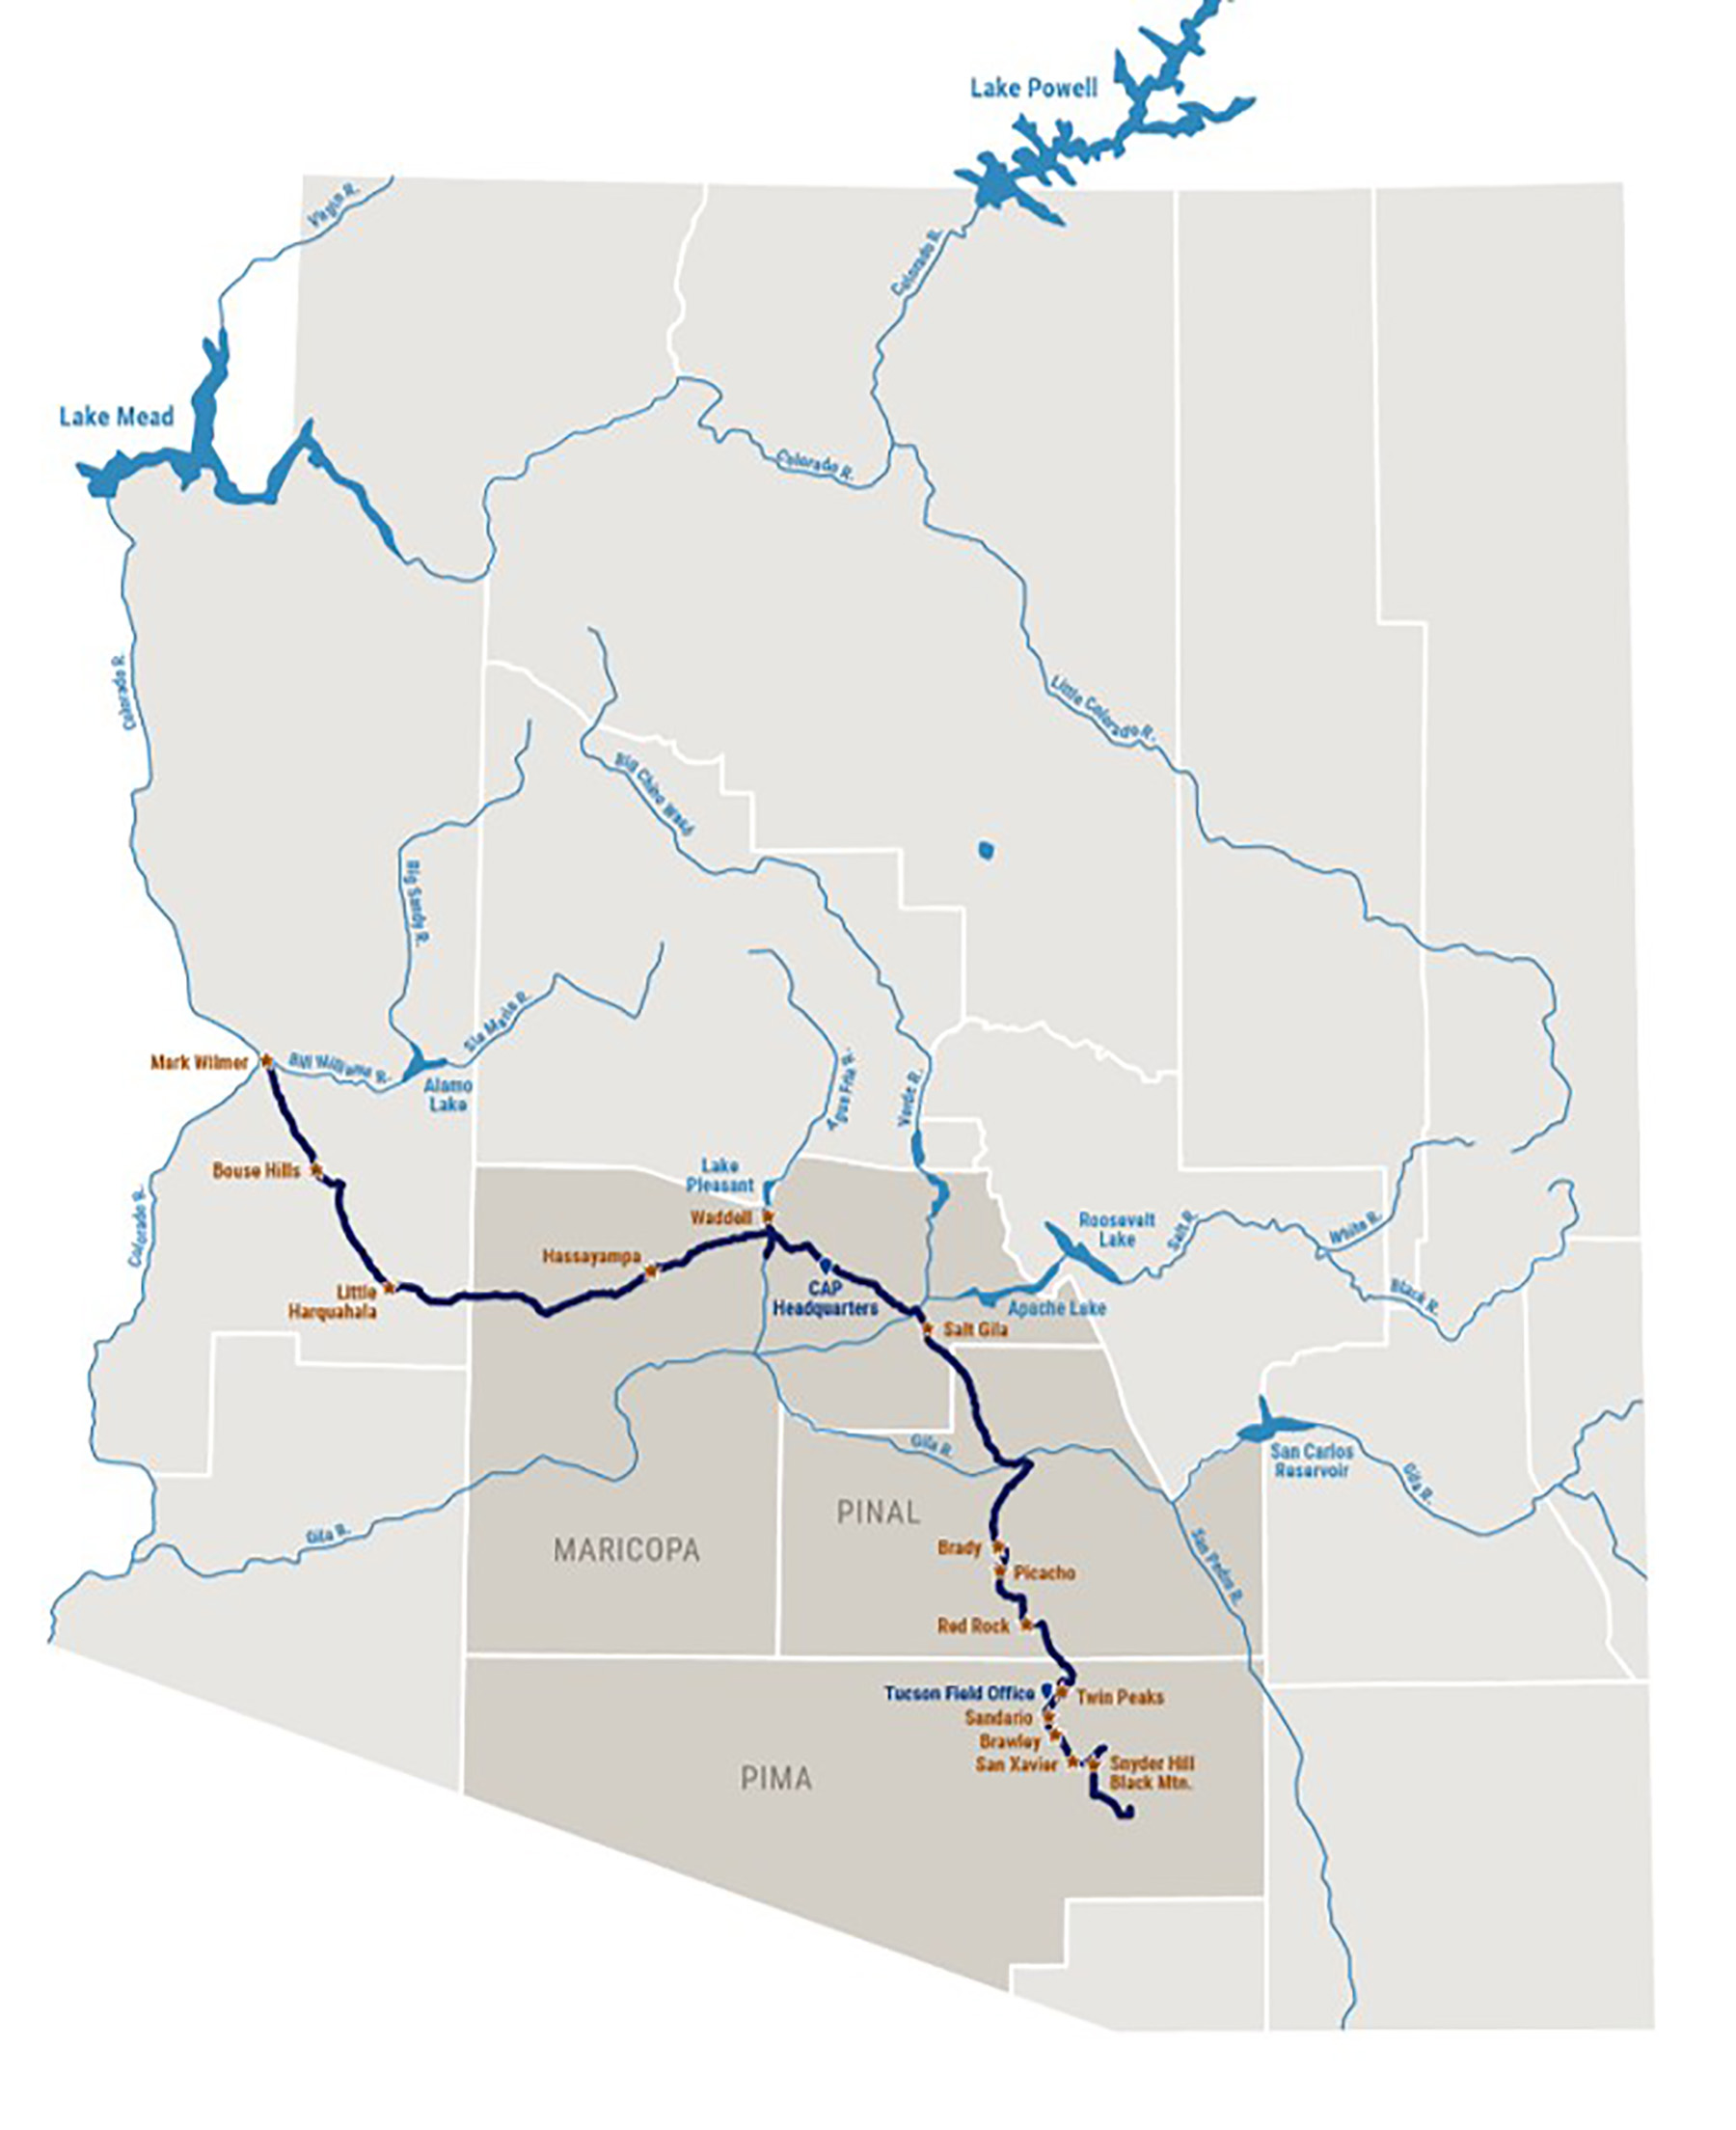 map that shows the regions of Arizona the water canal serves